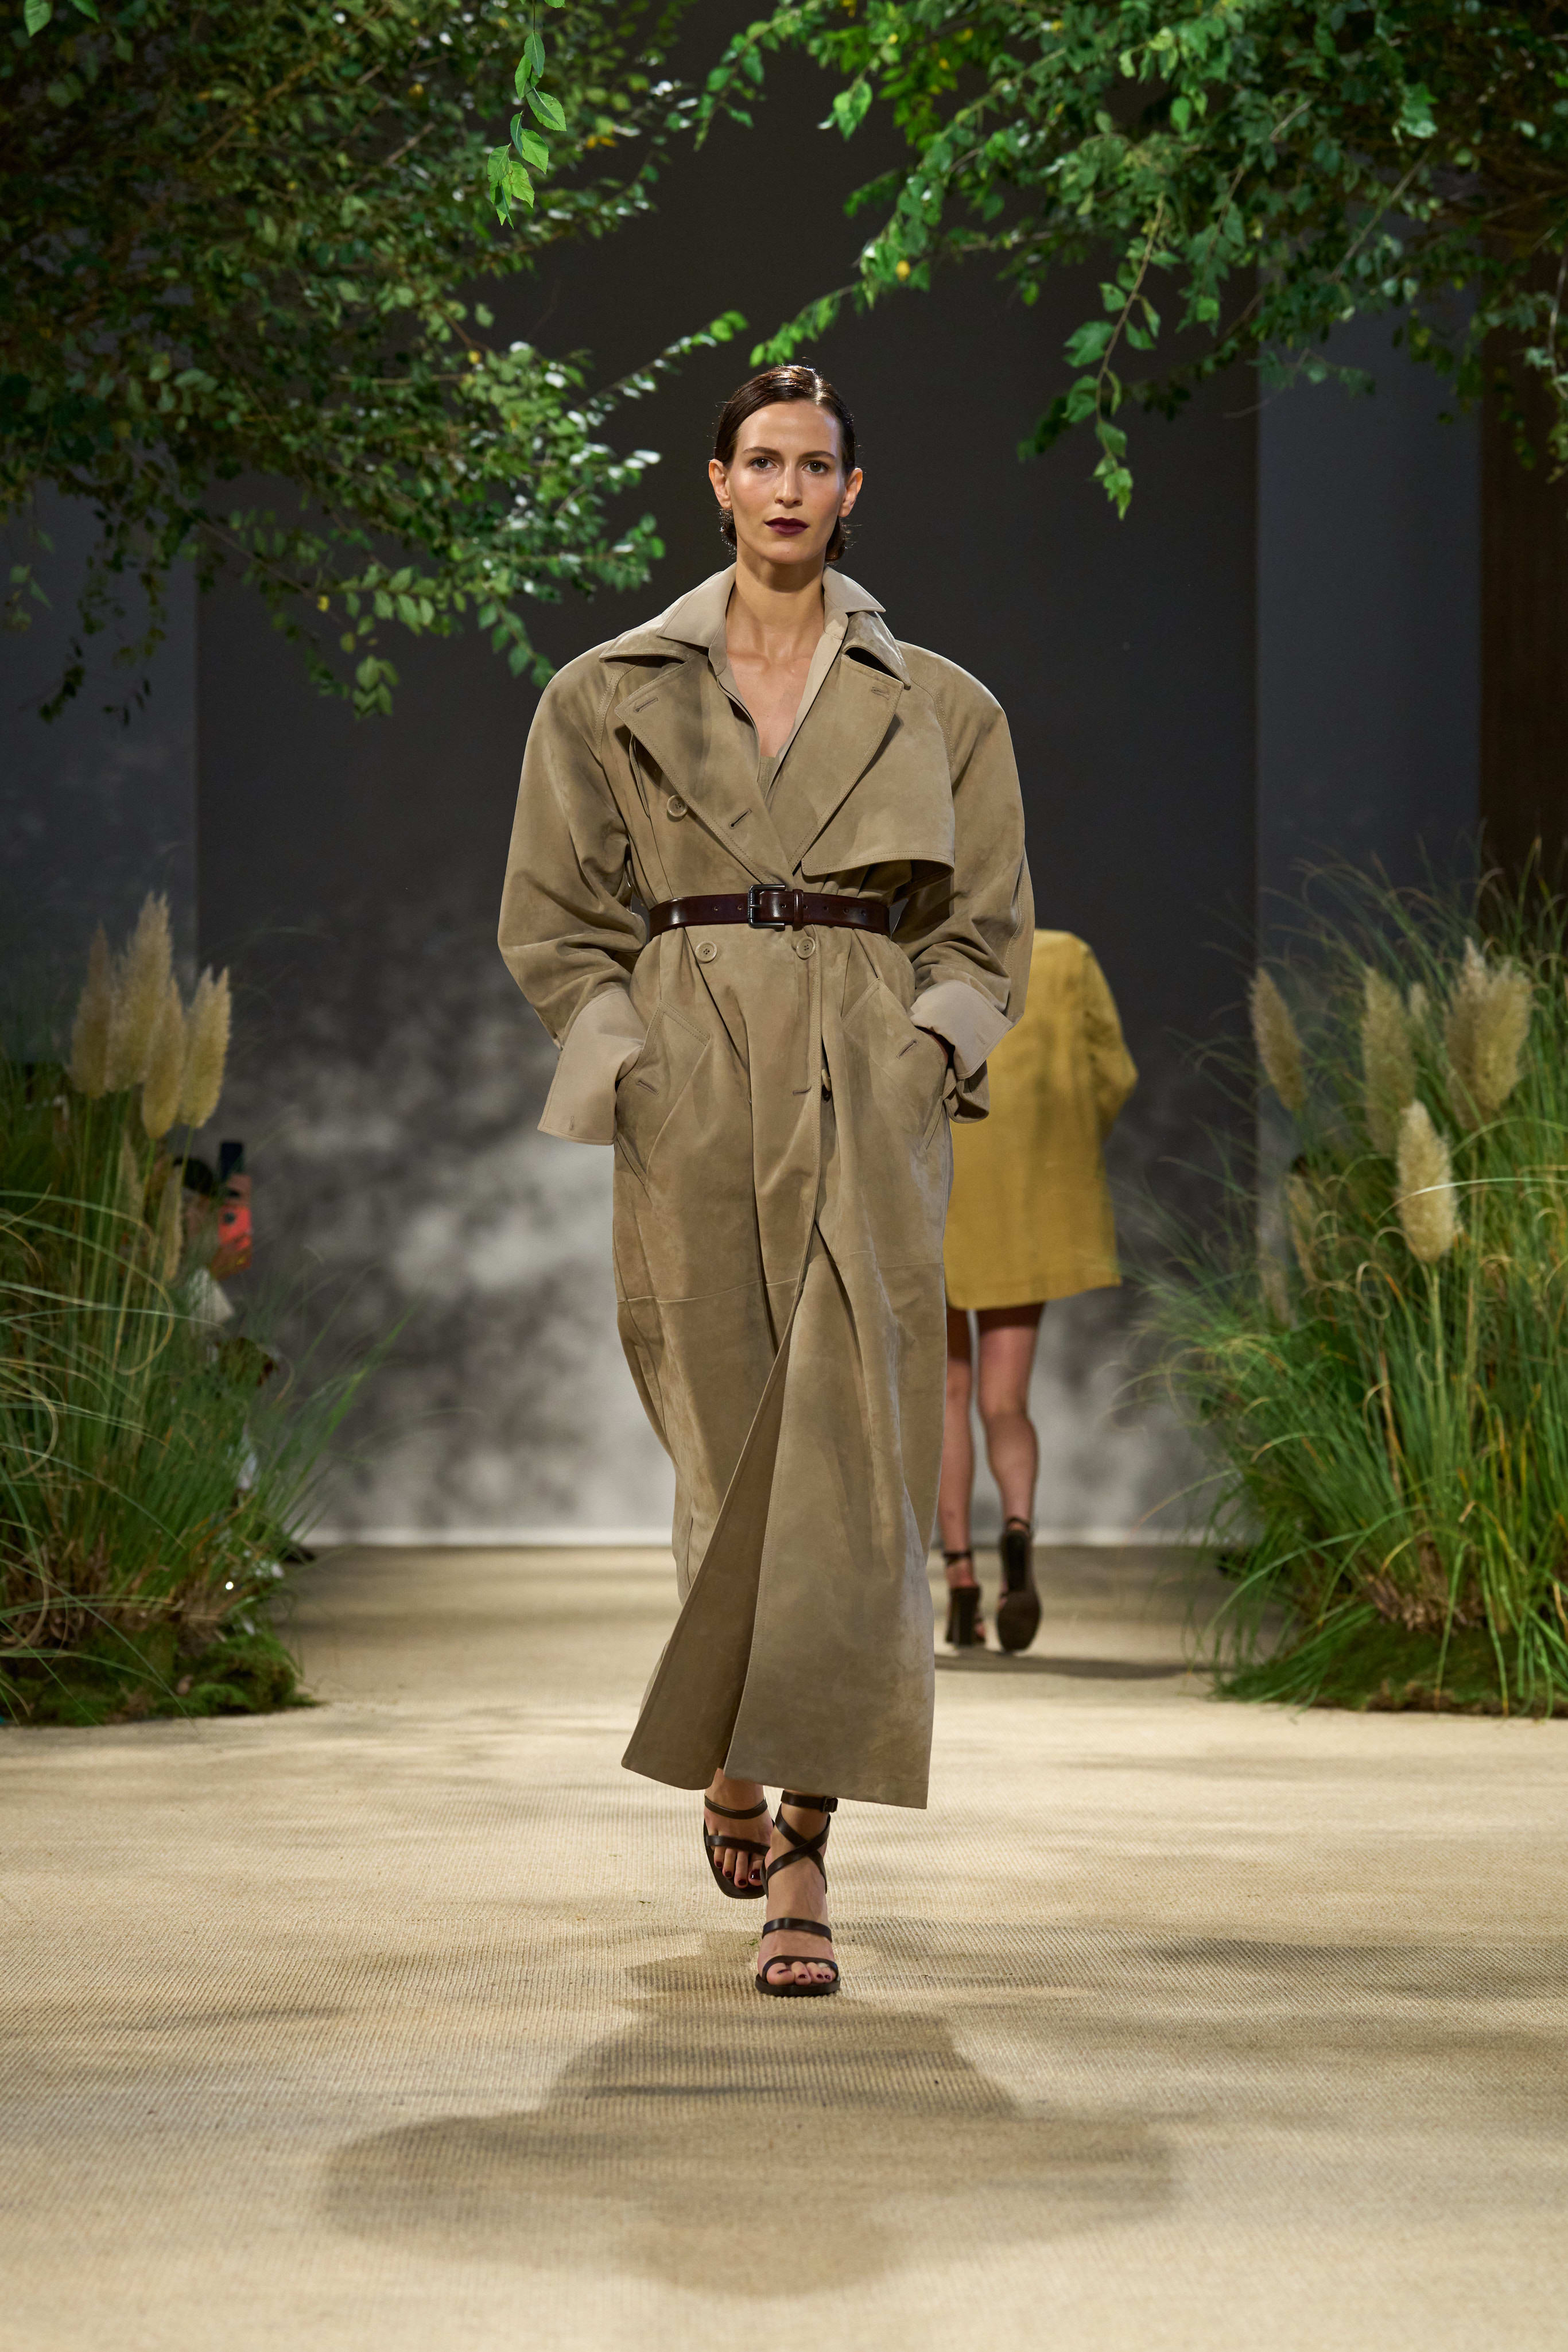 Max Mara Looks To Military Codes For A Modern 'Uniform' In Milan